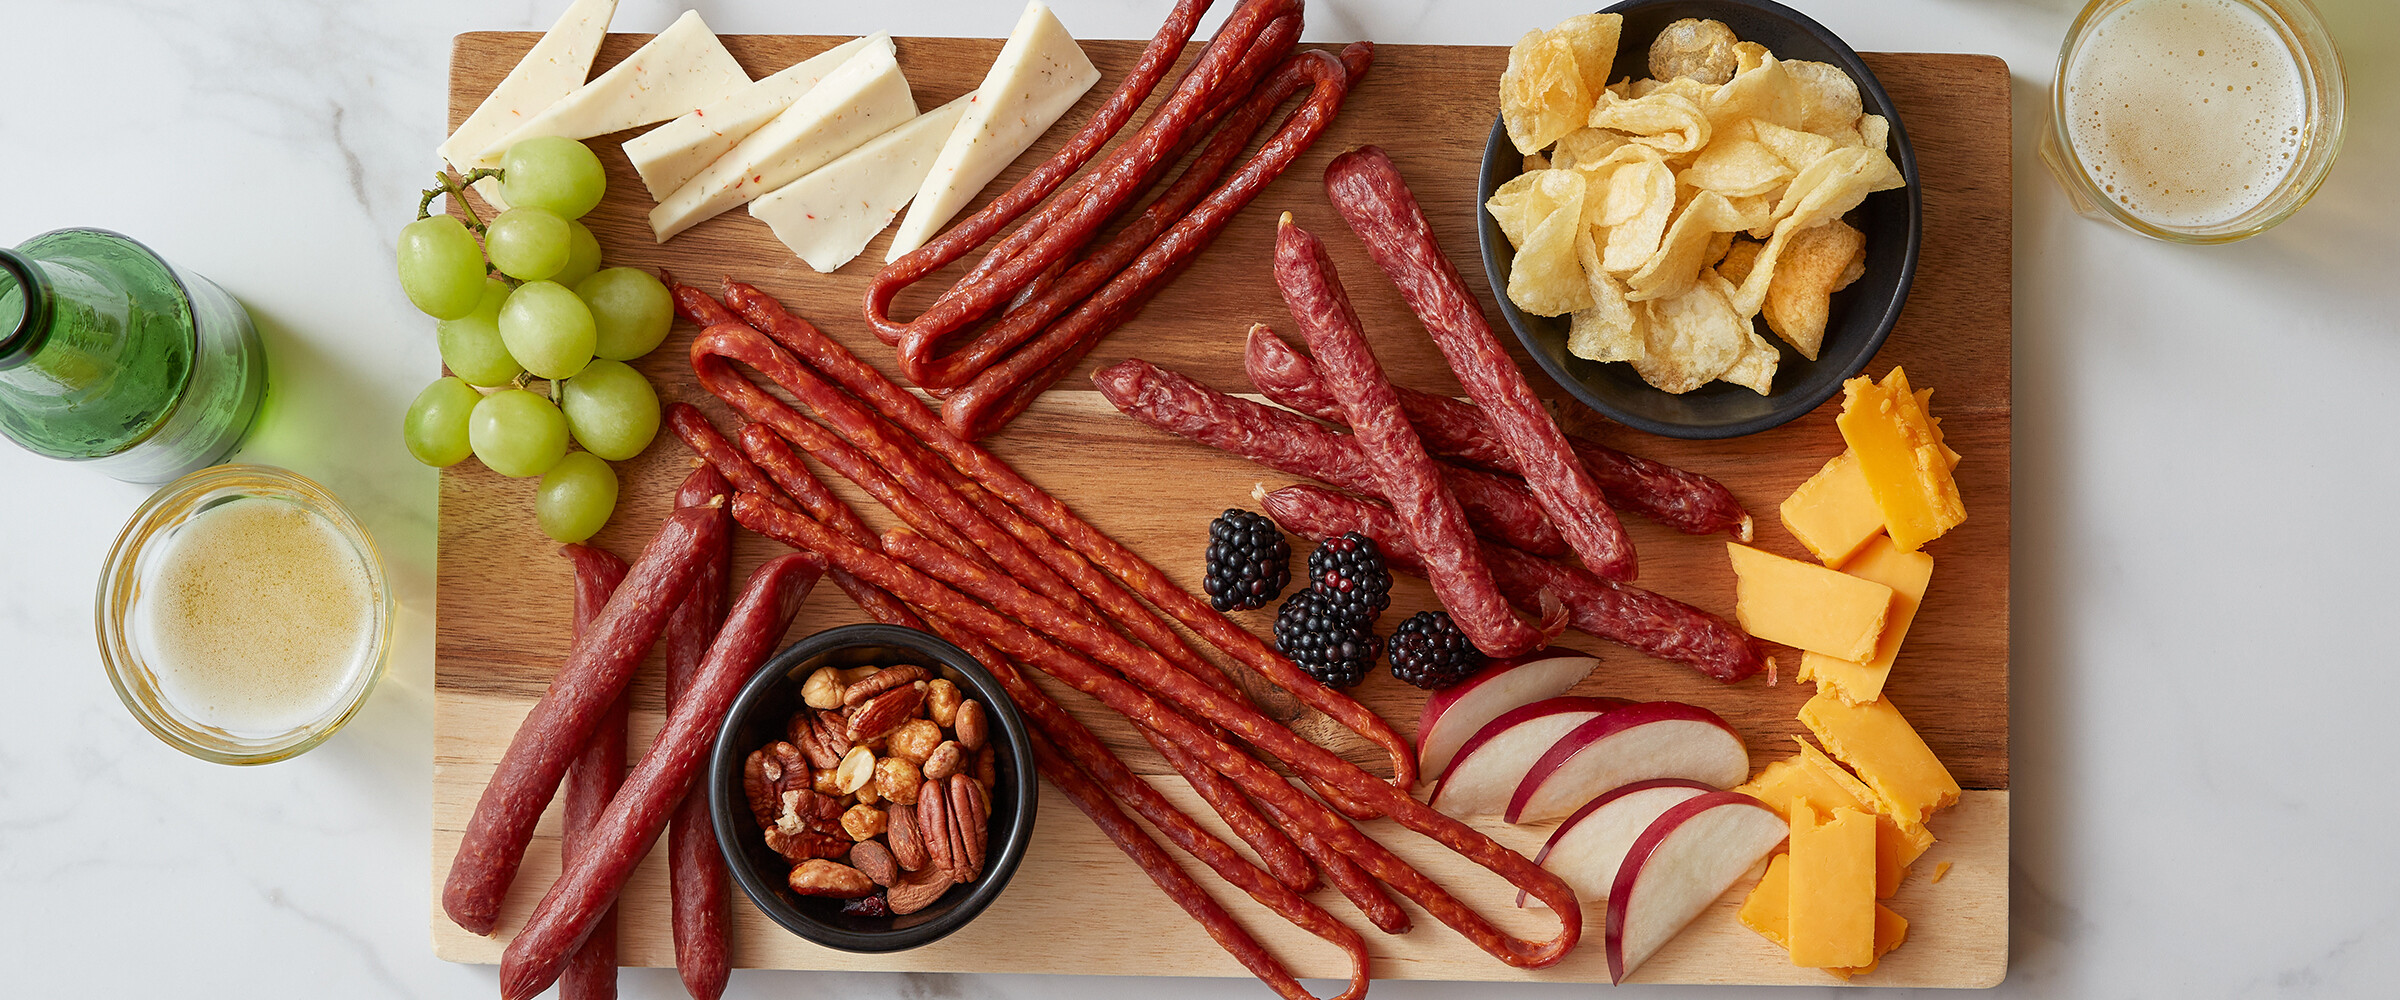 Salami whips and sticks on a board with grapes, cheese and chips